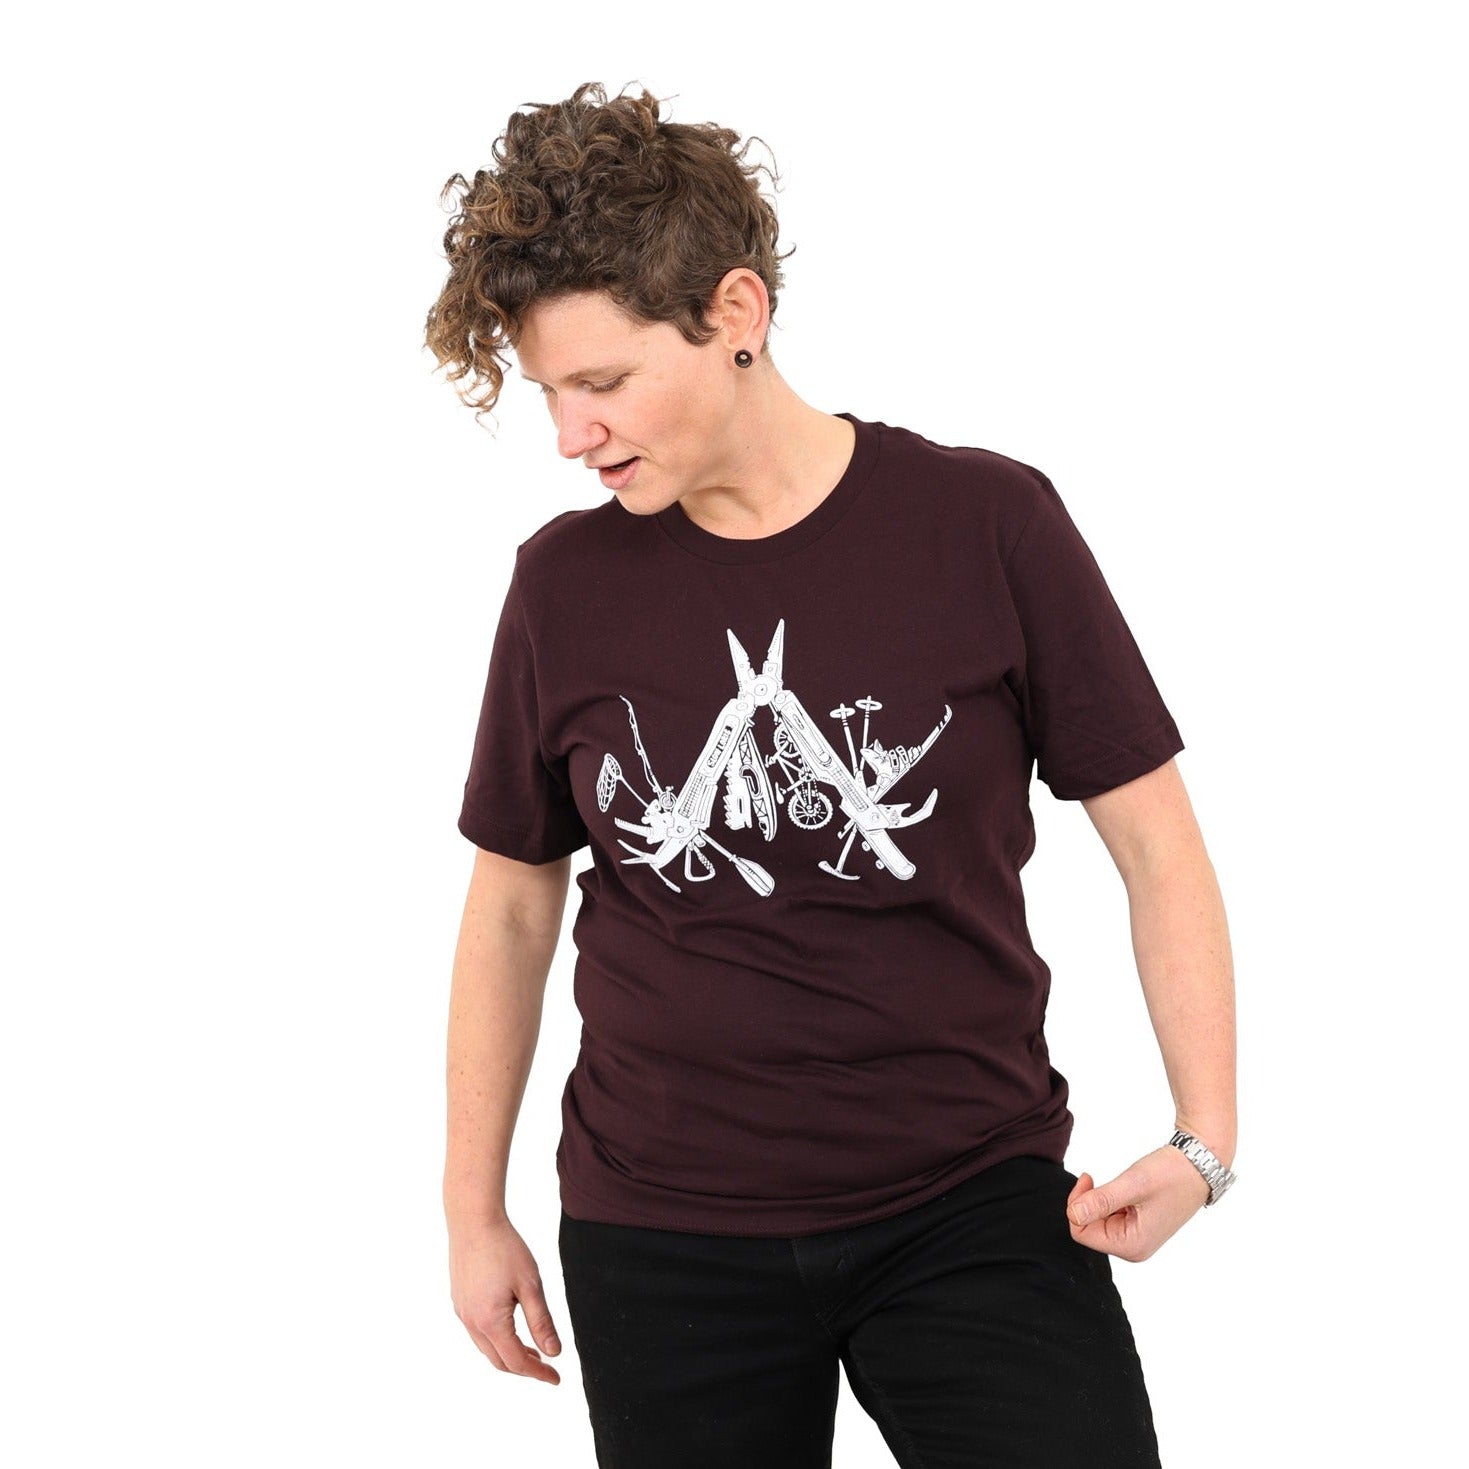 Woman wearing oxblood colored t-shirt with a white print of a multitool. The tools within the multitool are actually adventuring items- kayak, fishing pole, skis, ice axe, etc etc.